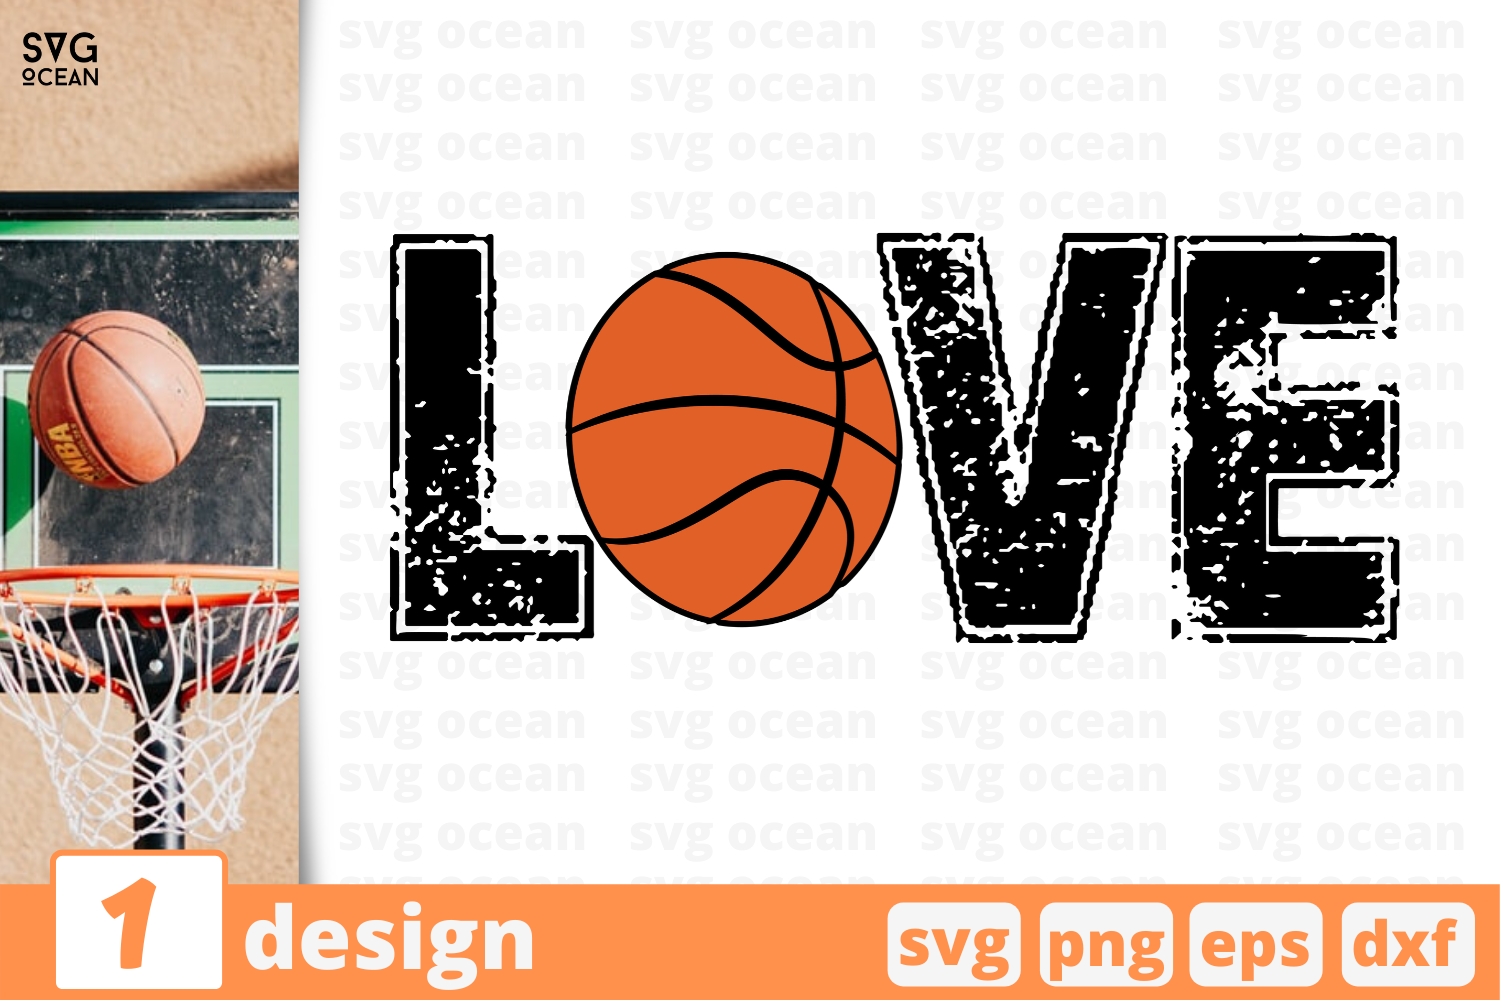 Download 1 LOVE, basketball quote cricut svg By SvgOcean ...